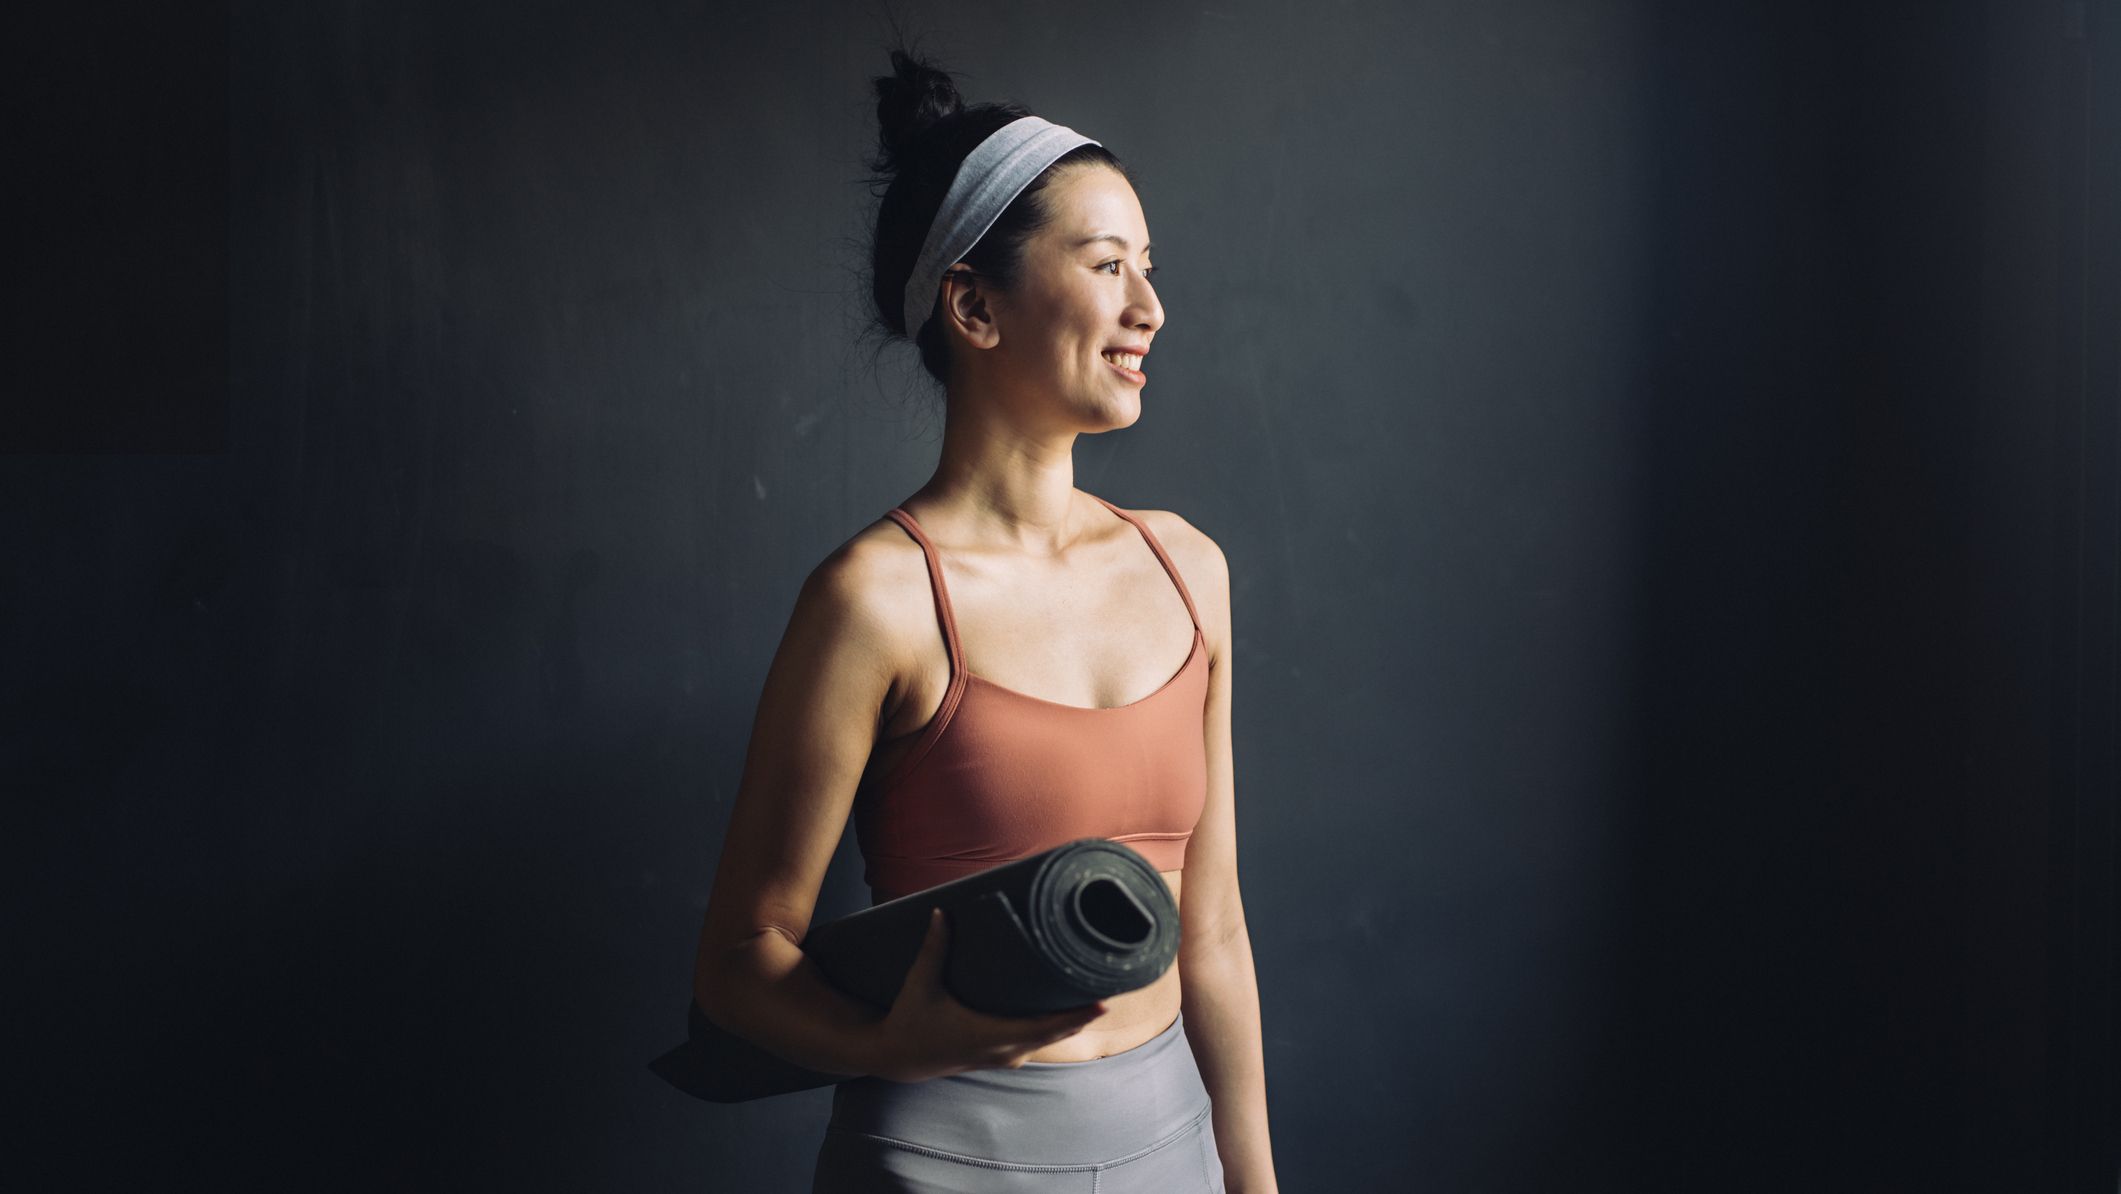 https://hips.hearstapps.com/hmg-prod/images/waist-up-portrait-of-a-happy-asian-woman-in-sports-royalty-free-image-1591304235.jpg?crop=1xw:0.84415xh;center,top